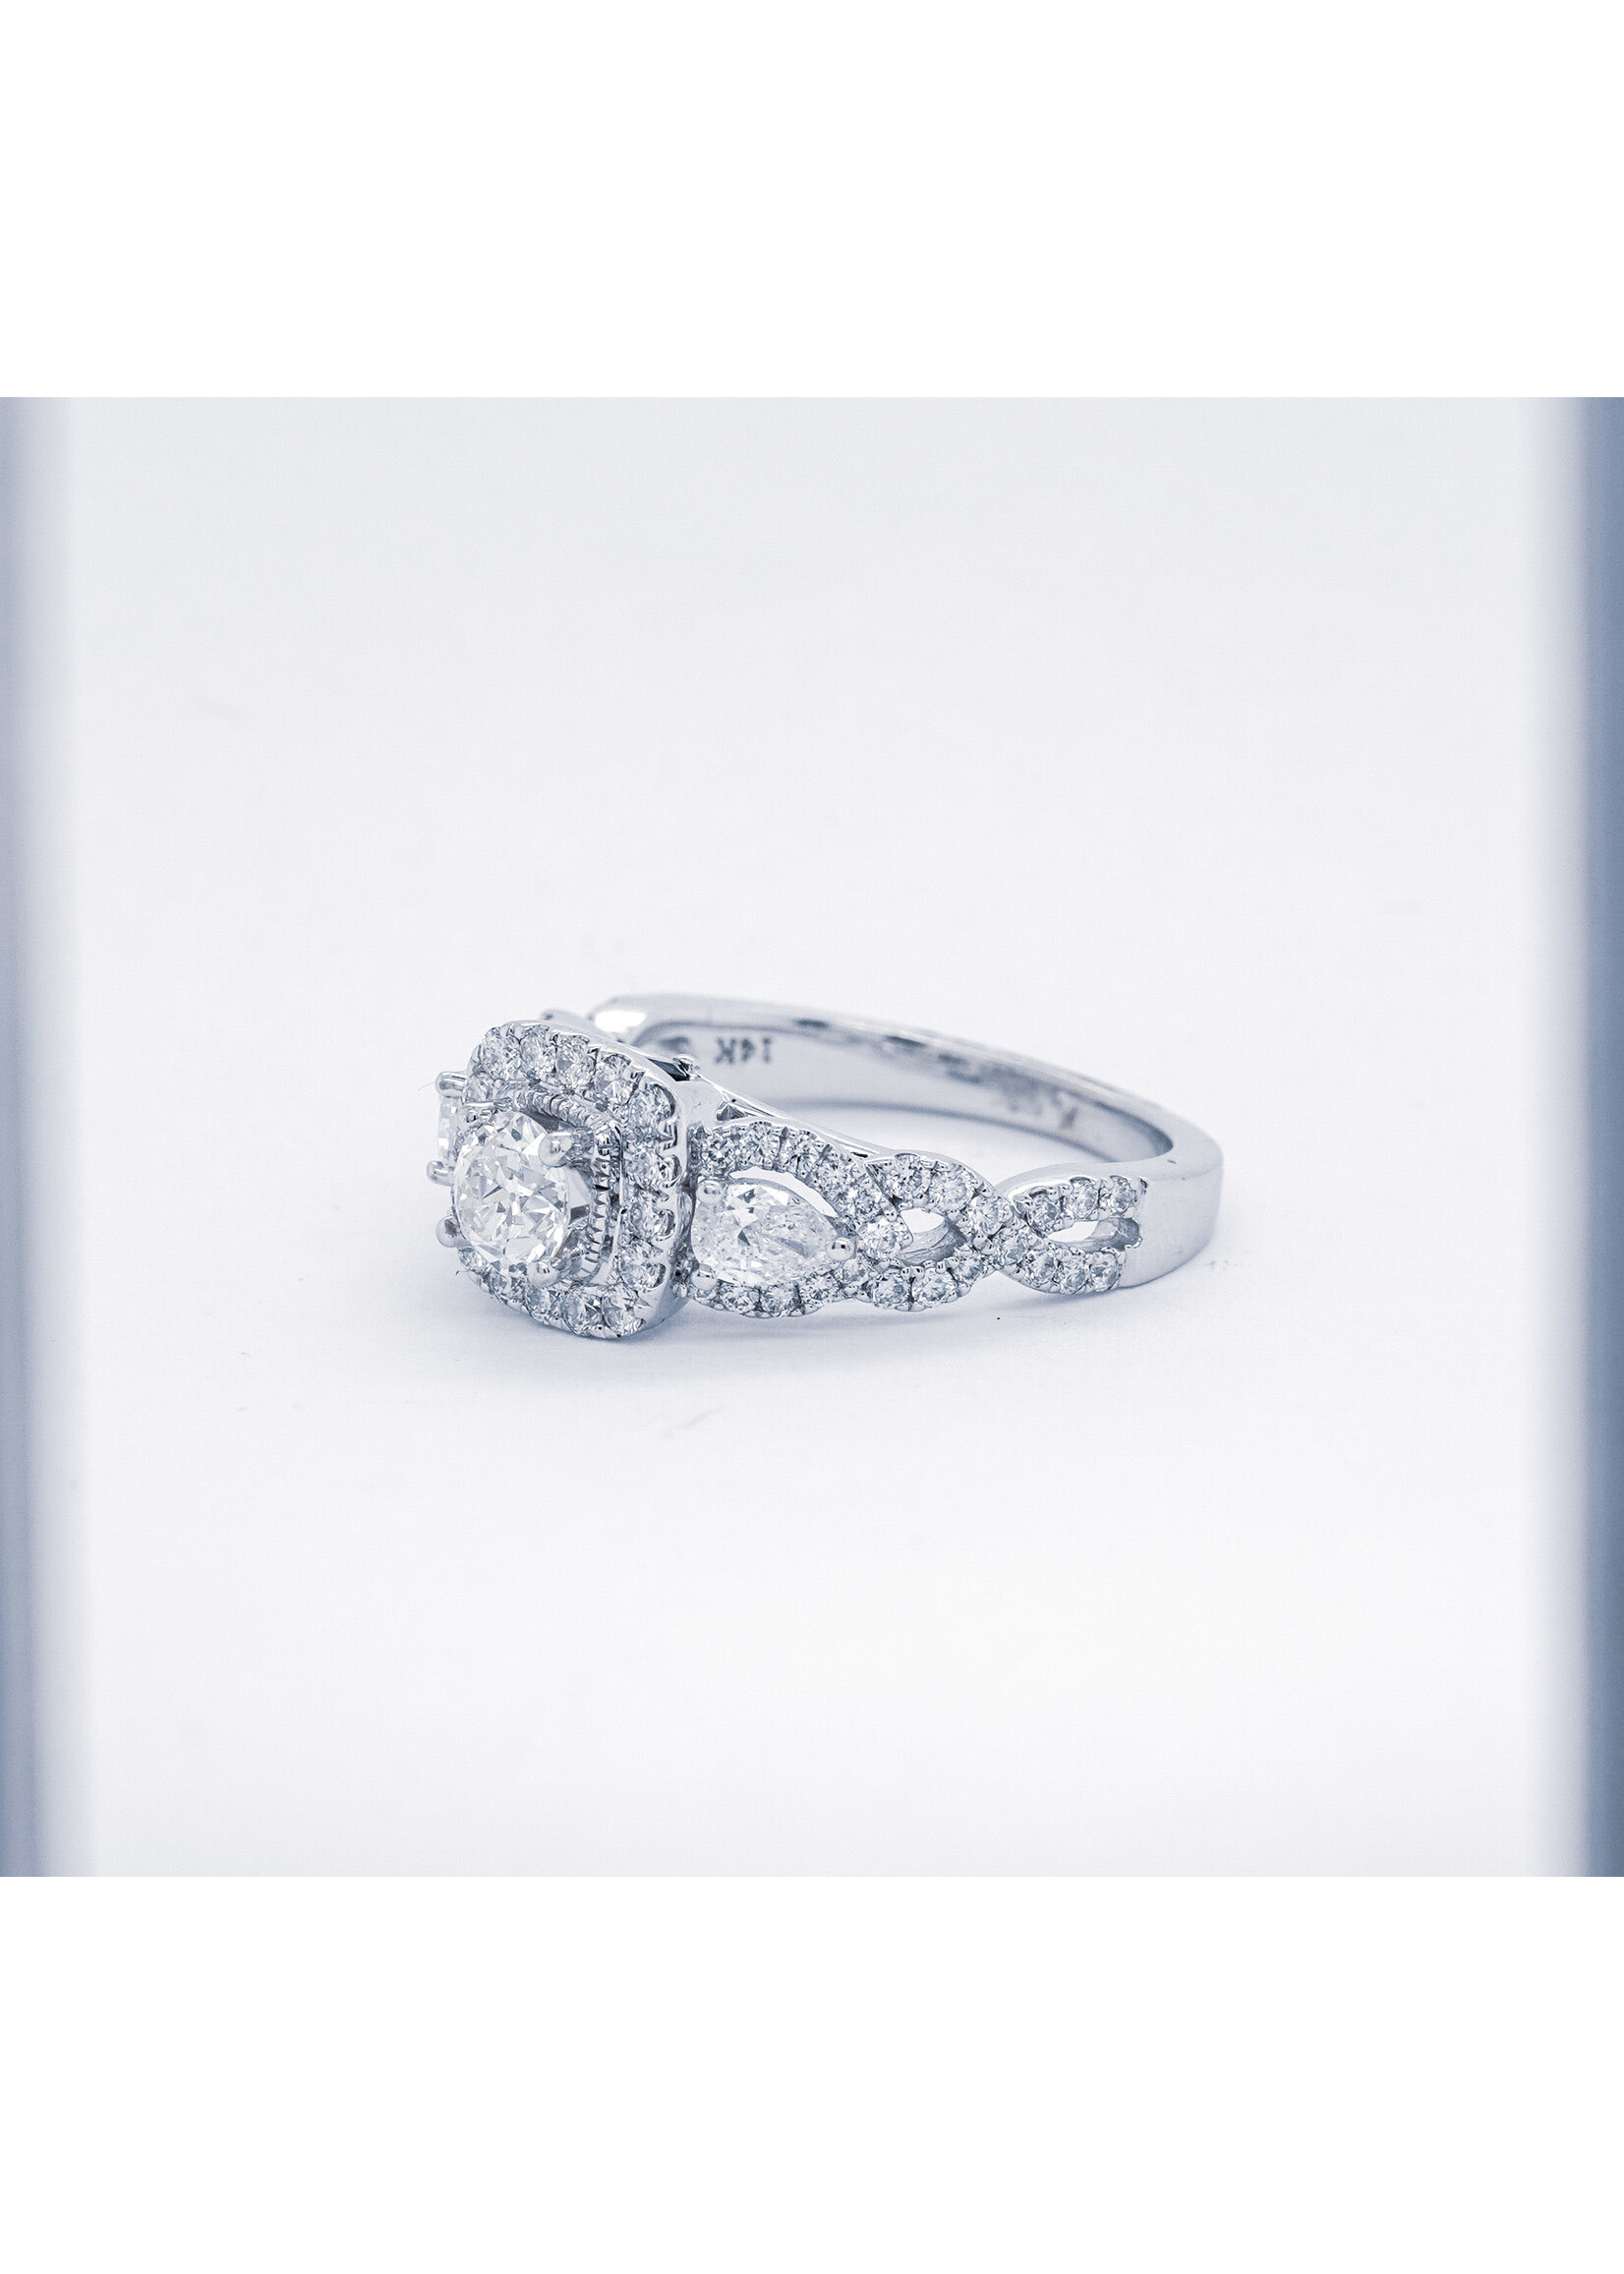 14KW 5.95g 1.50TW (.50ctr) H/SI2 Old European Cut Diamond Halo Vera Wang Engagement Ring (size 7)